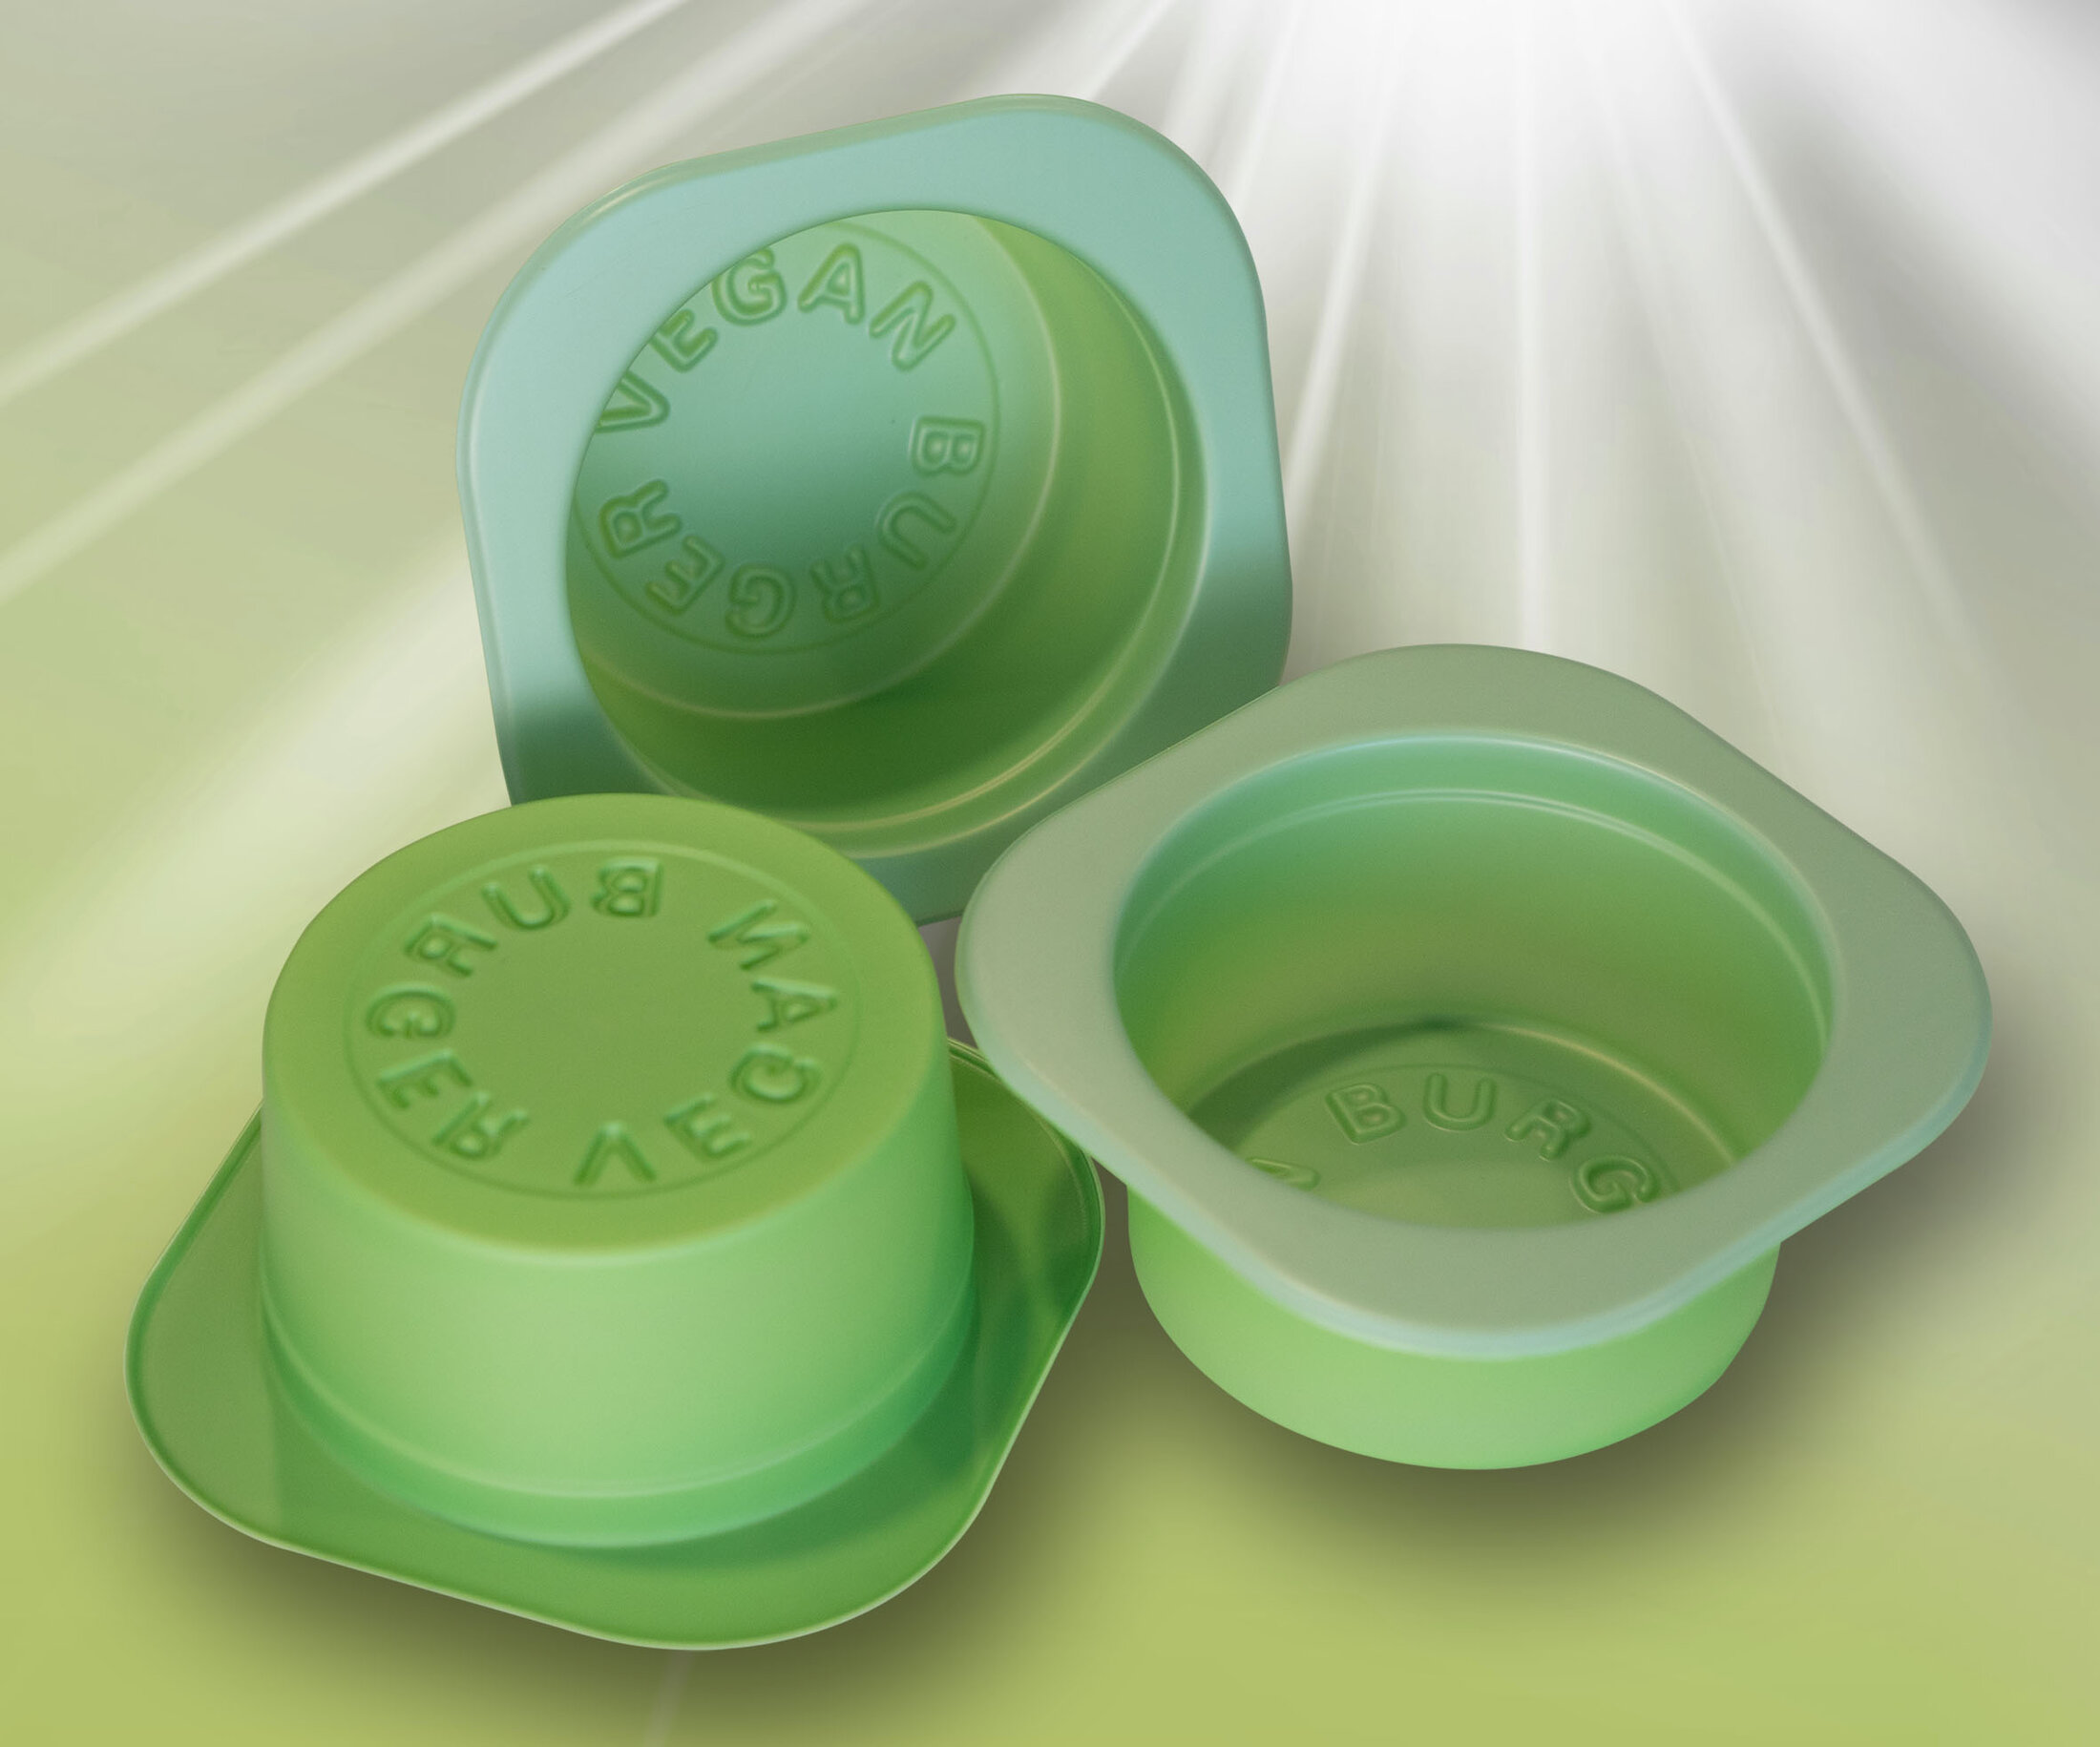 Industrial compostable thermoformed containers with heat-sealable lids, especially suitable for vegetarian and vegan foods and dairy products. | © ILLIG Maschinenbau GmbH